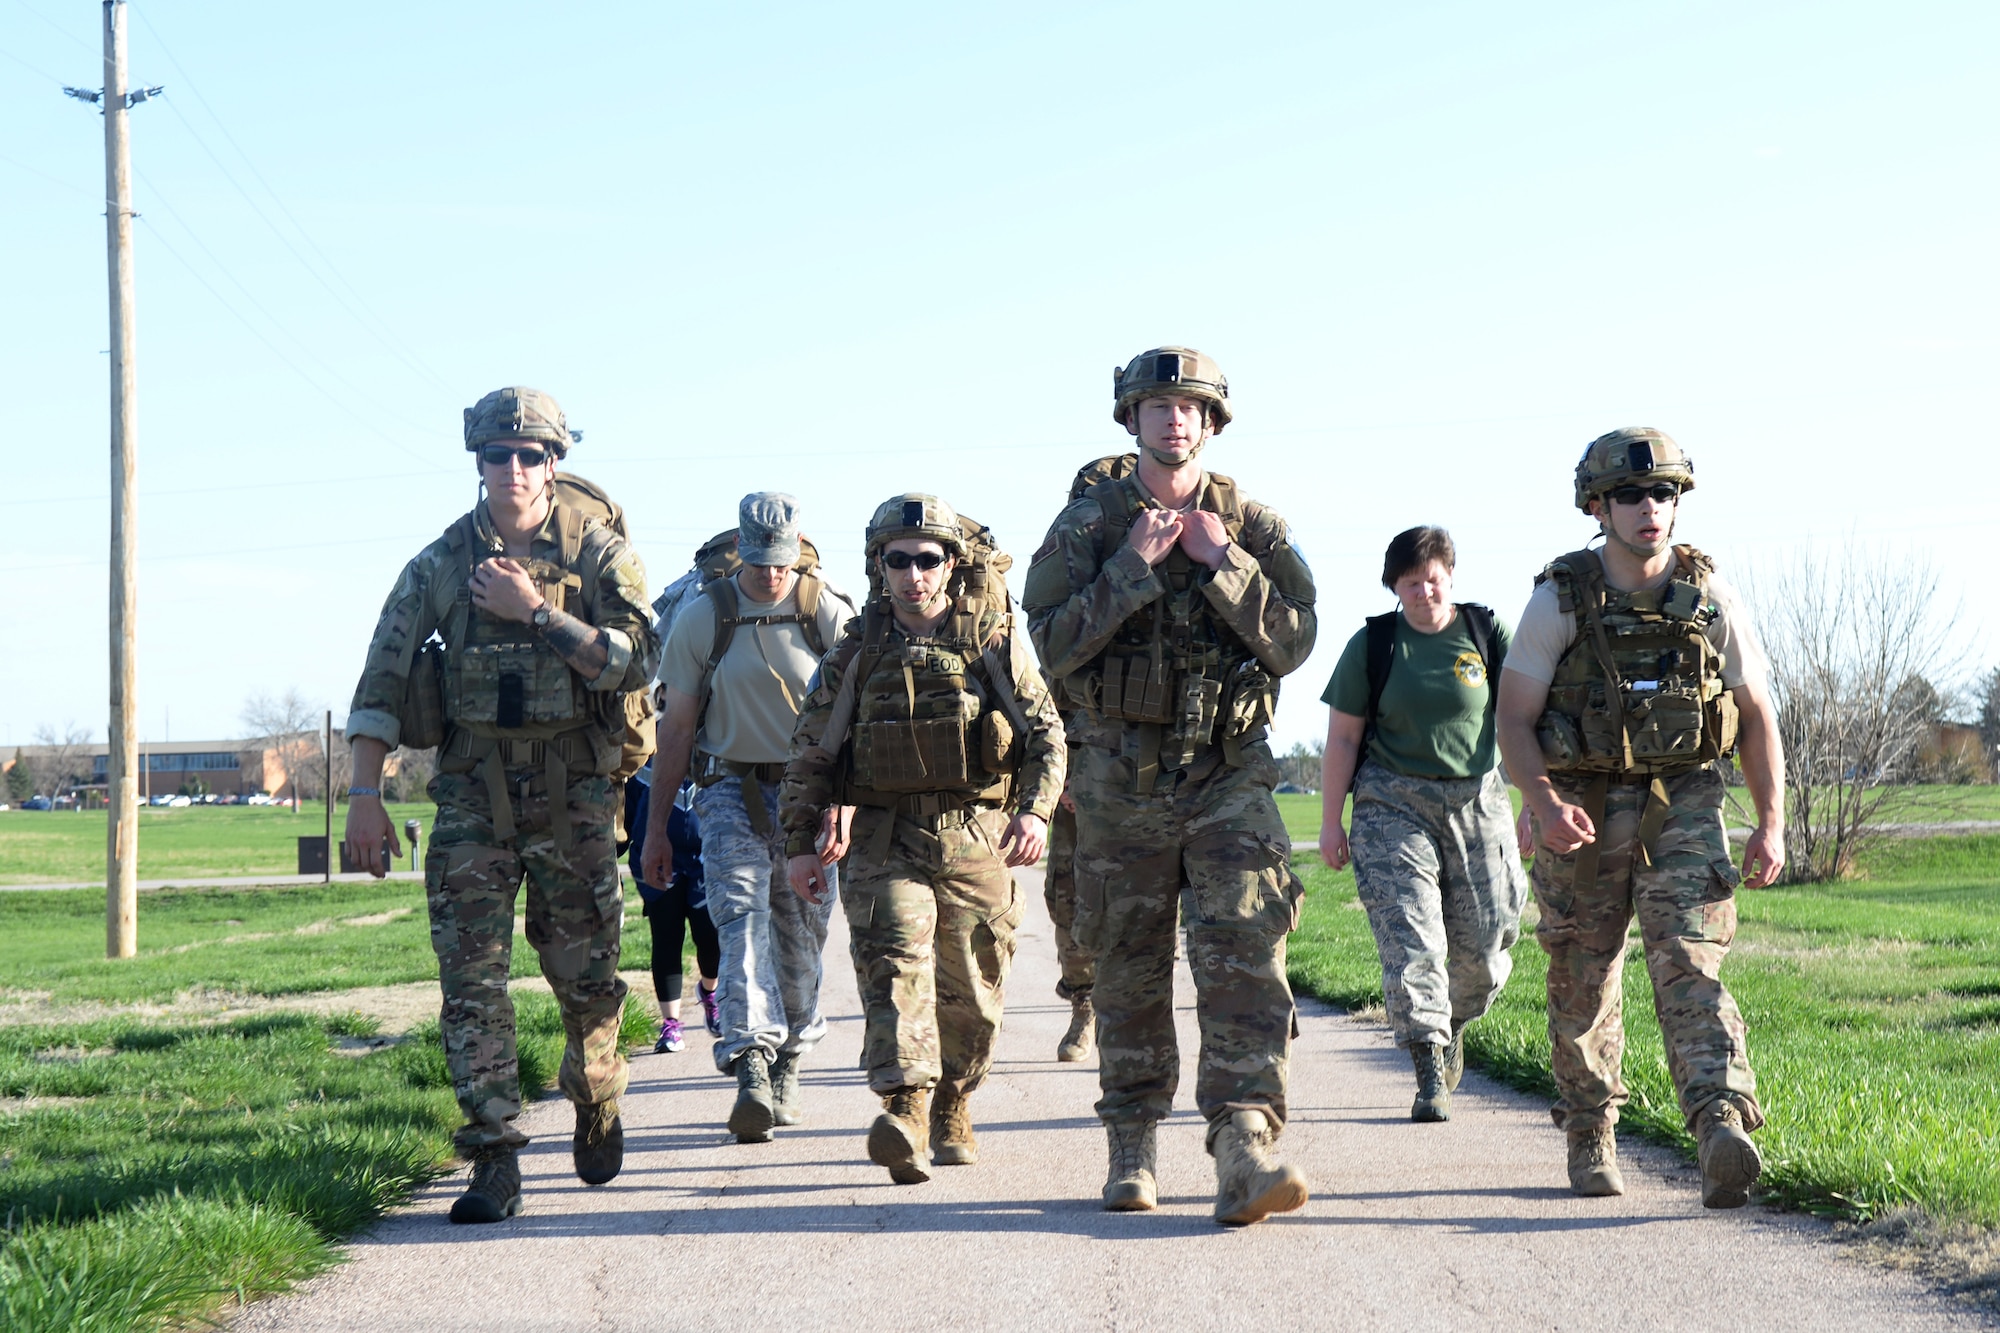 Members of the 28th Civil Engineer Squadron Explosive Ordnance Disposal Flight participate in the 50th Anniversary EOD Memorial Day ruck march at Ellsworth Air Force Base, S.D., May 4, 2018. National EOD Memorial Day is designated by Congress as the first Saturday of May to honor of EOD technicians who lost their lives while conducting operations across the globe. (U.S. Air Force photo by Airman 1st Class Nicolas Z. Erwin)